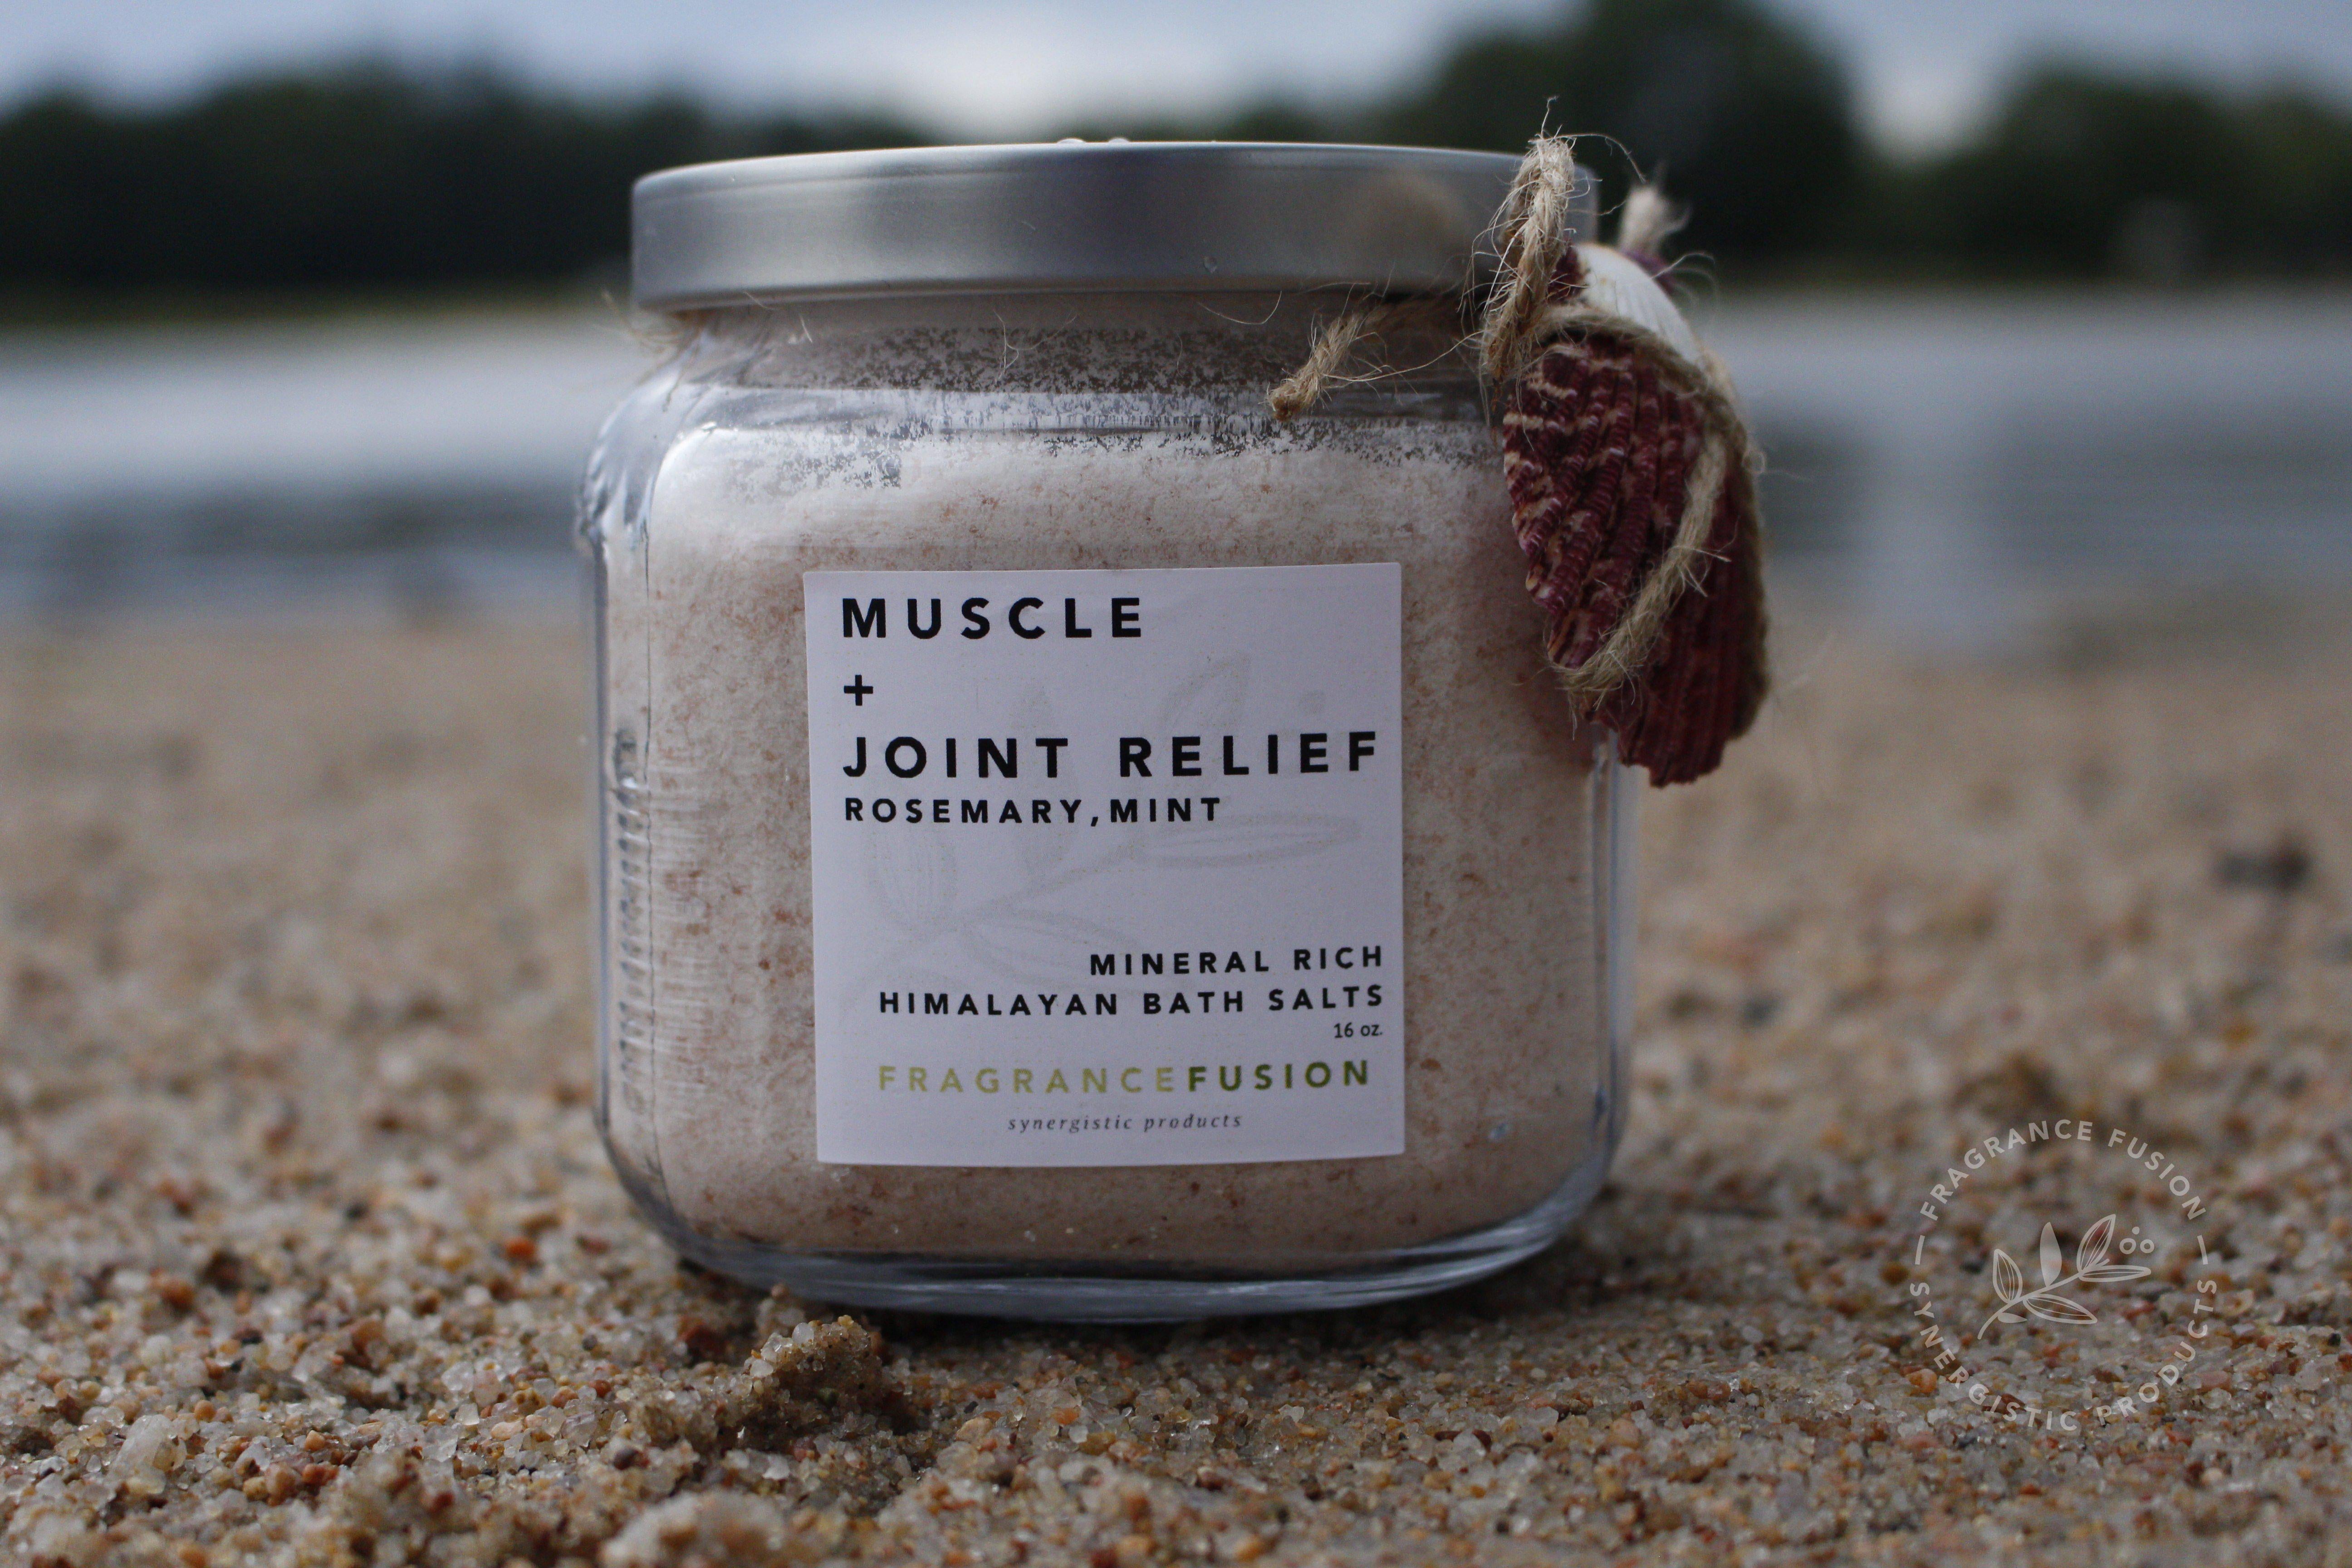 MUSCLE + JOINT RELIEF - Himalayan Bath Salts